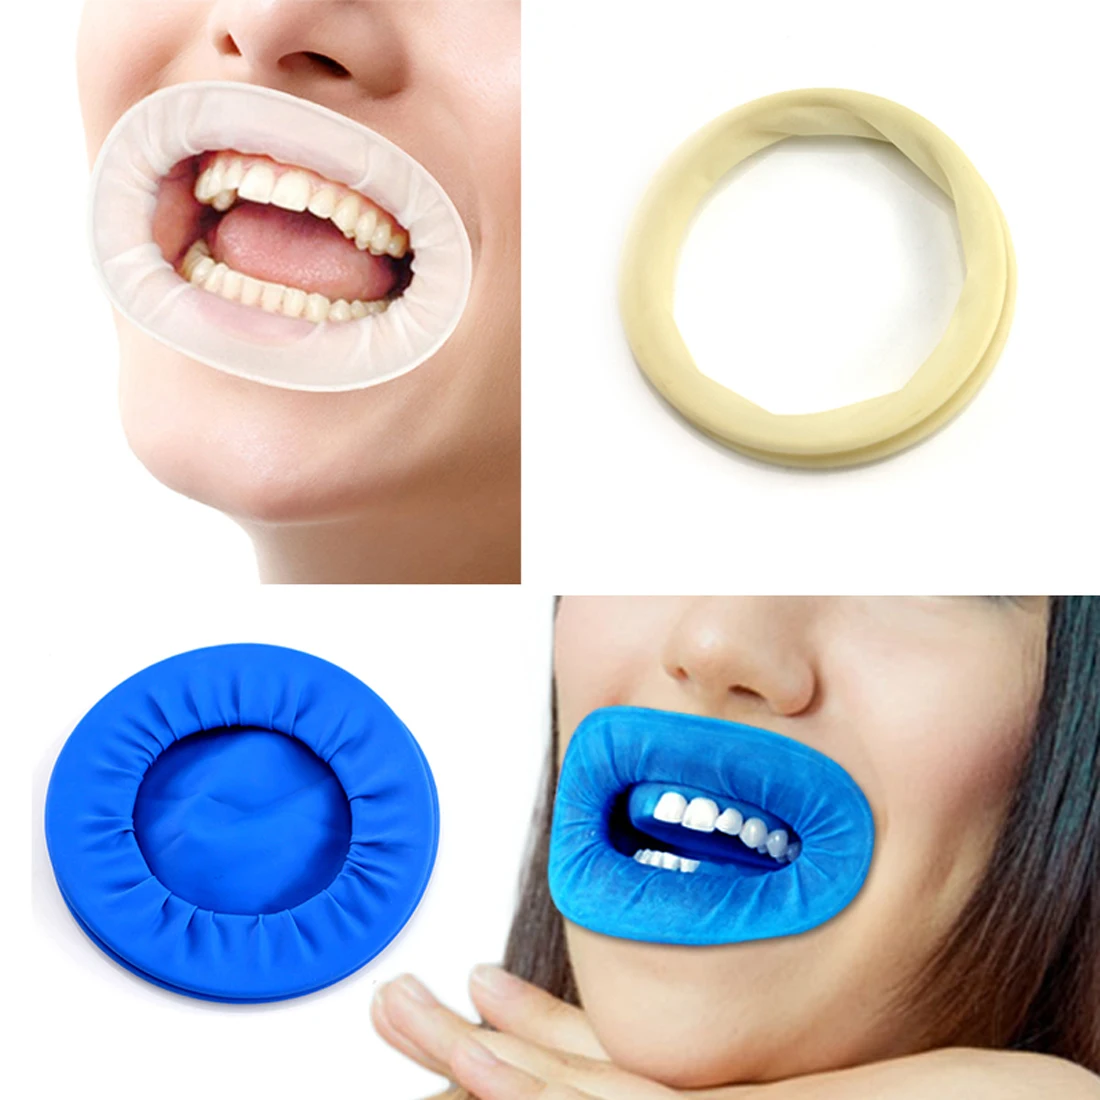 Dental Latex Hood Disposable Mouth Gags For Dentist Use Buy Dental 